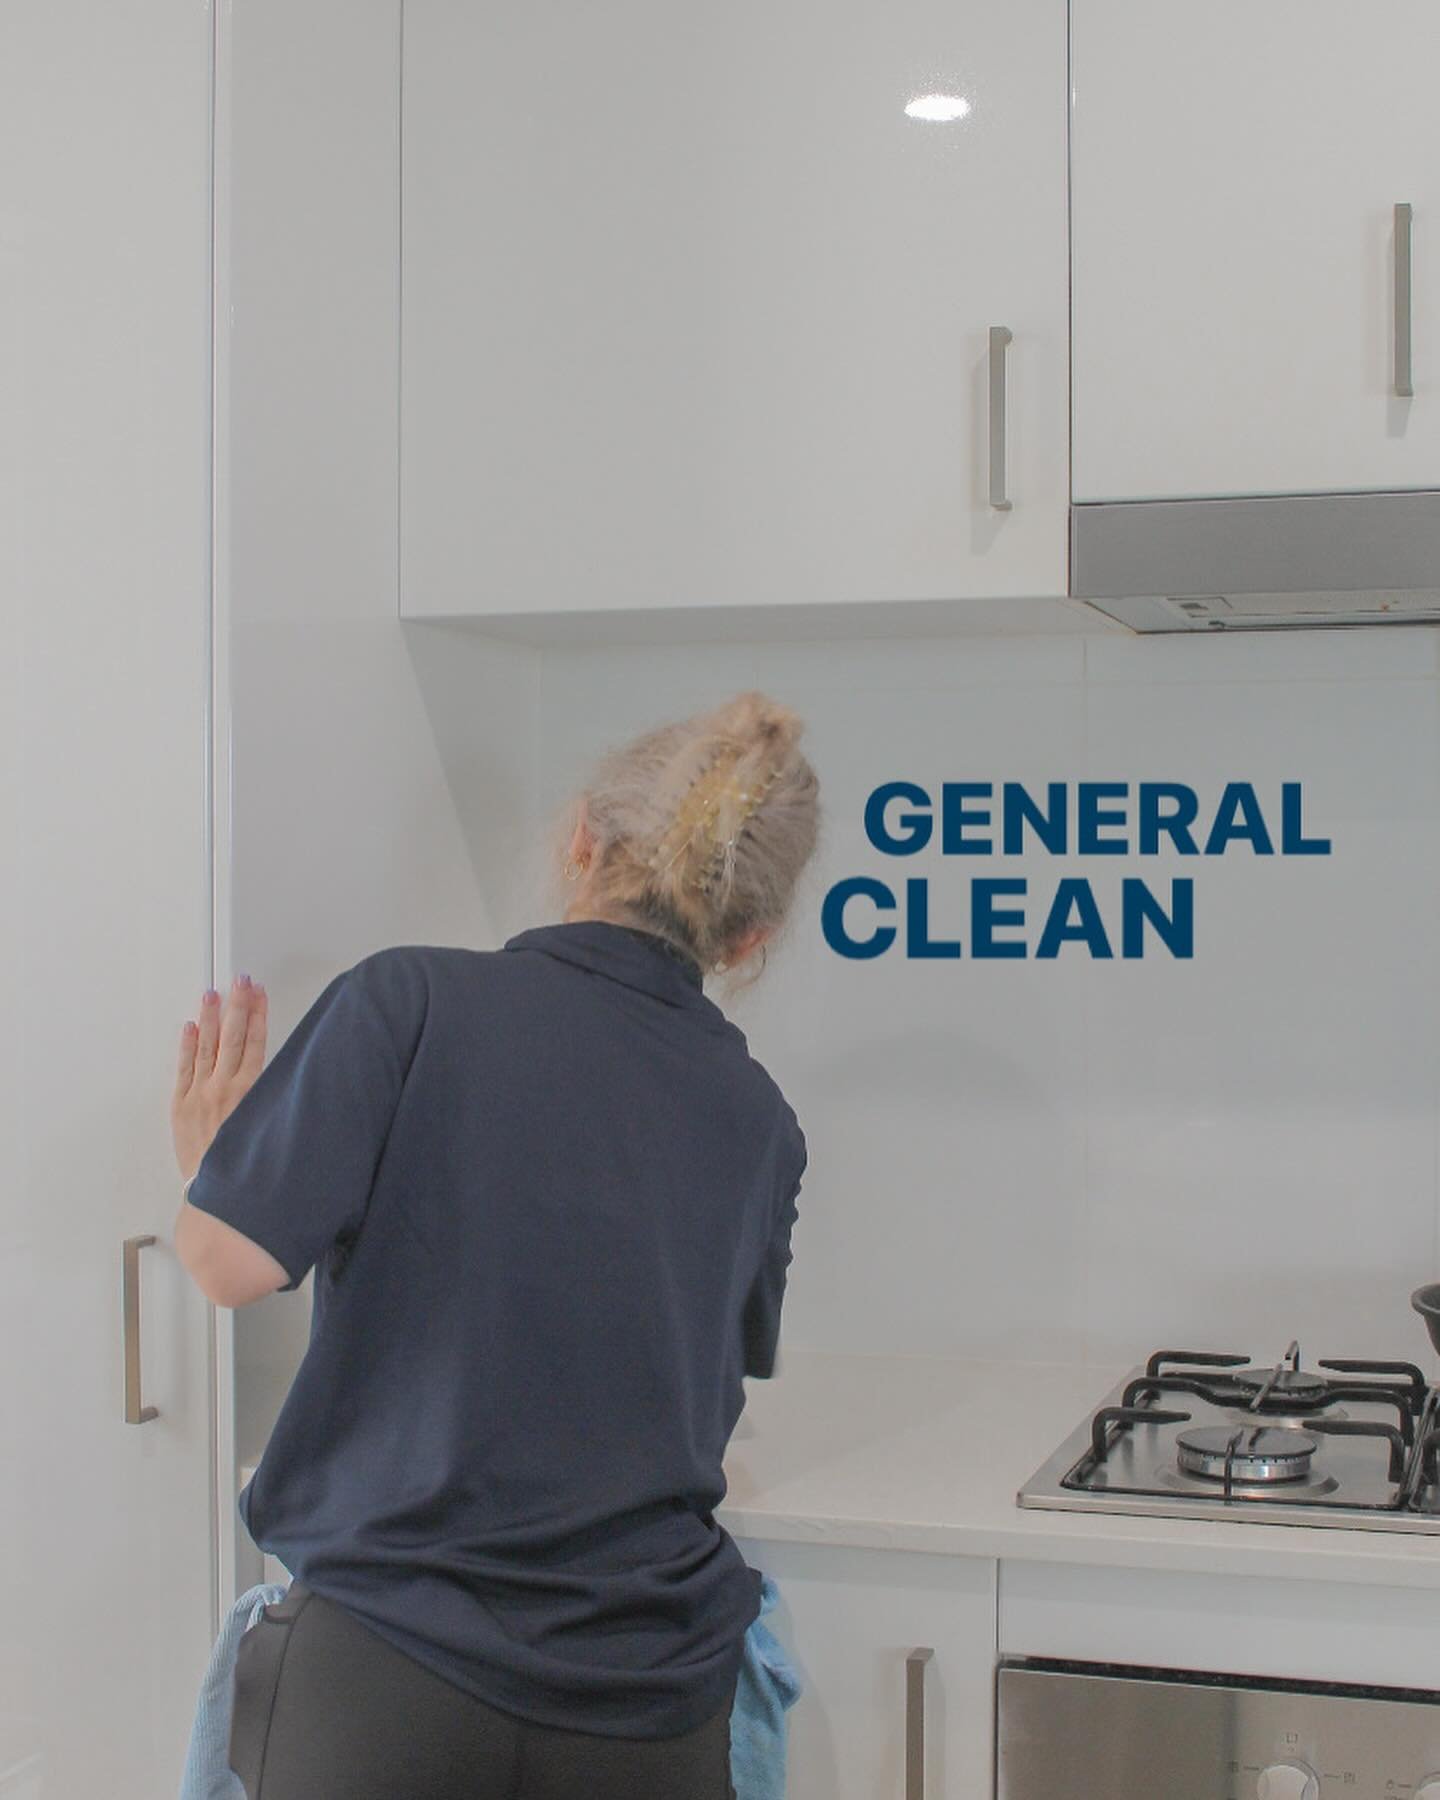 Our General Clean Package is perfect for a detailed tidy of your home. This is the ultimate package for recurring cleans. So if you are wanting to have weekly, fortnightly or monthly cleans, this is the clean for you!

But what does our General Clean